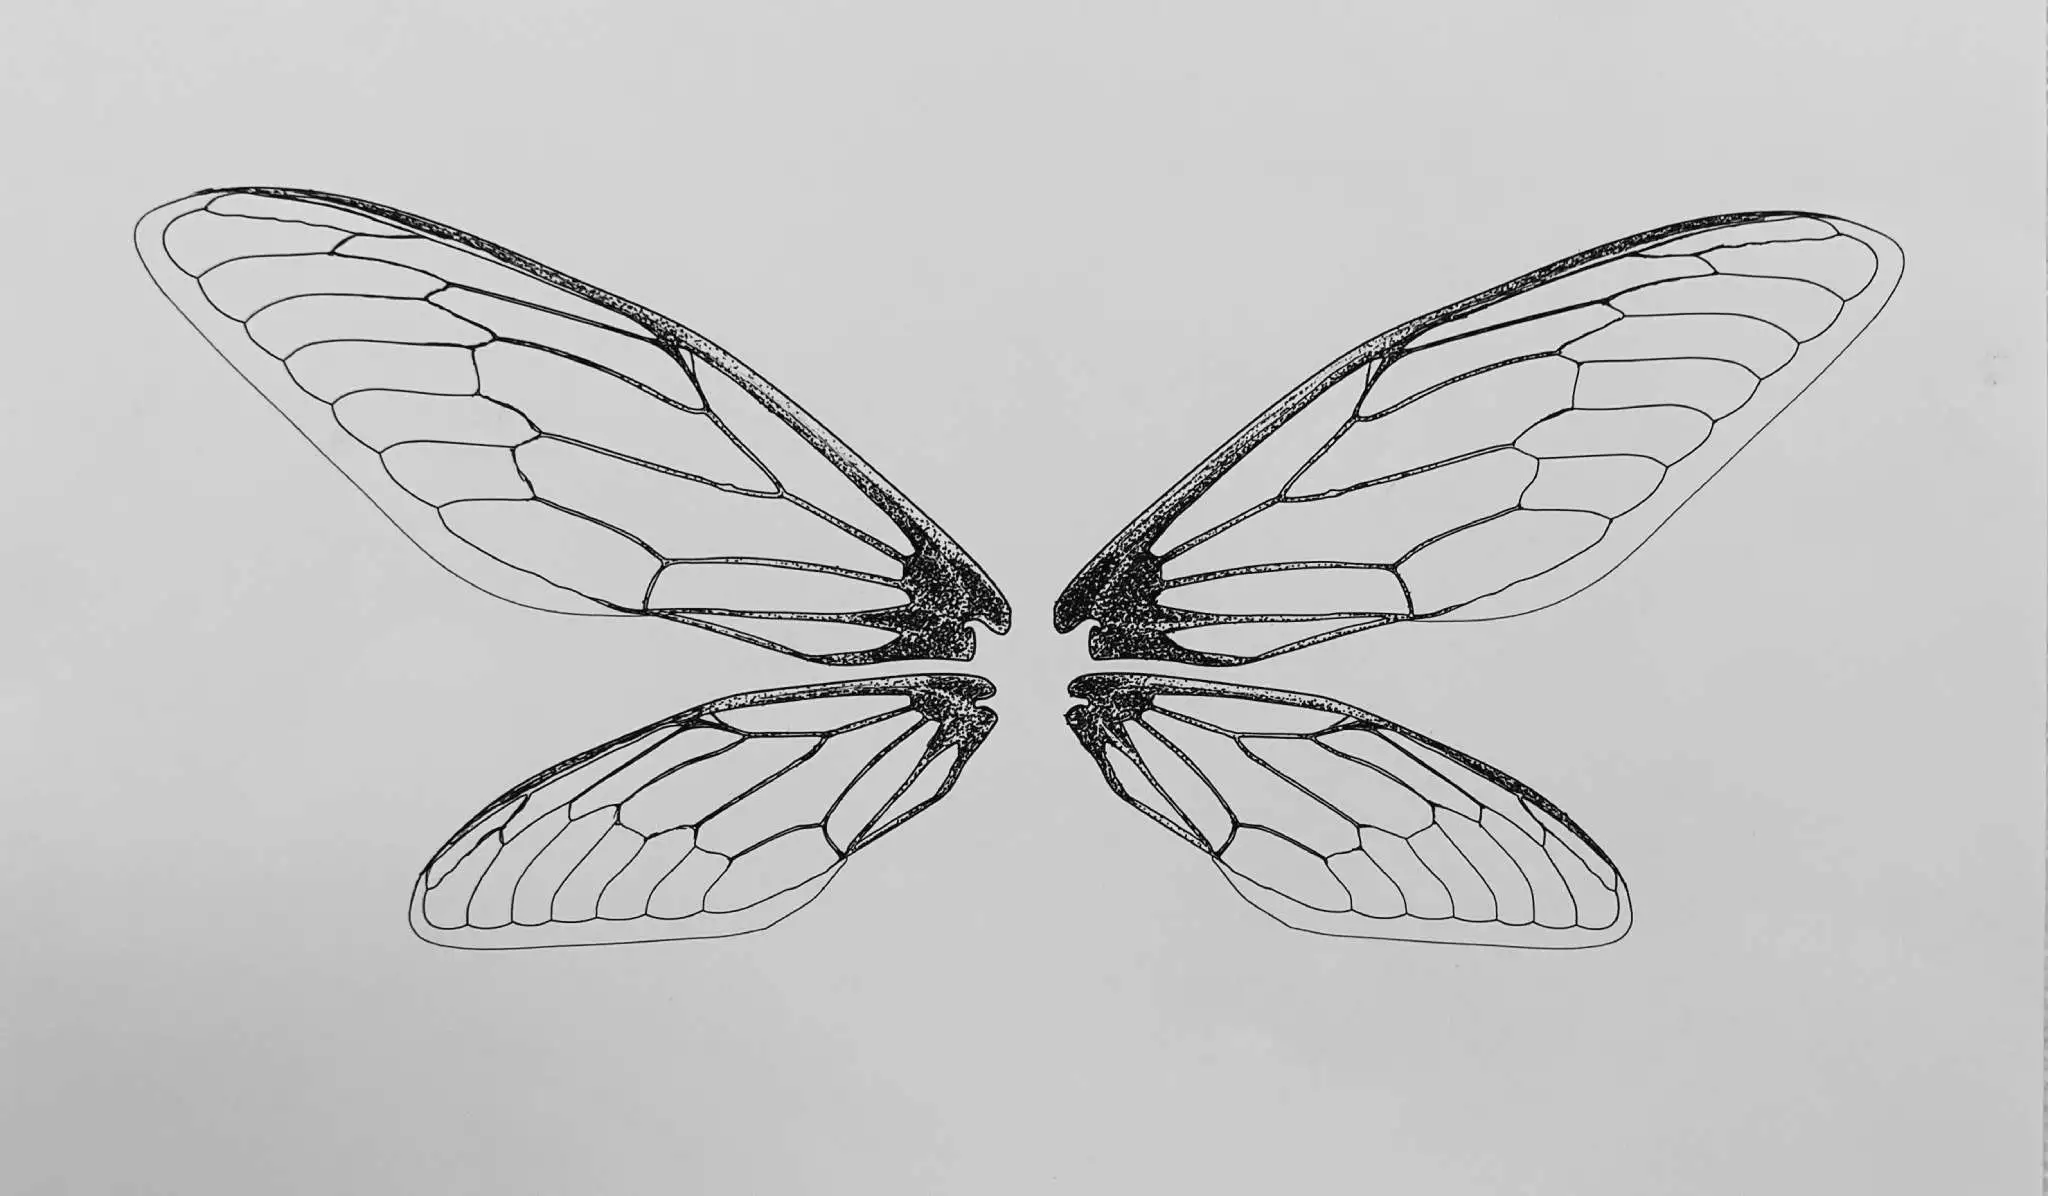 An outline of butterfly-like wings